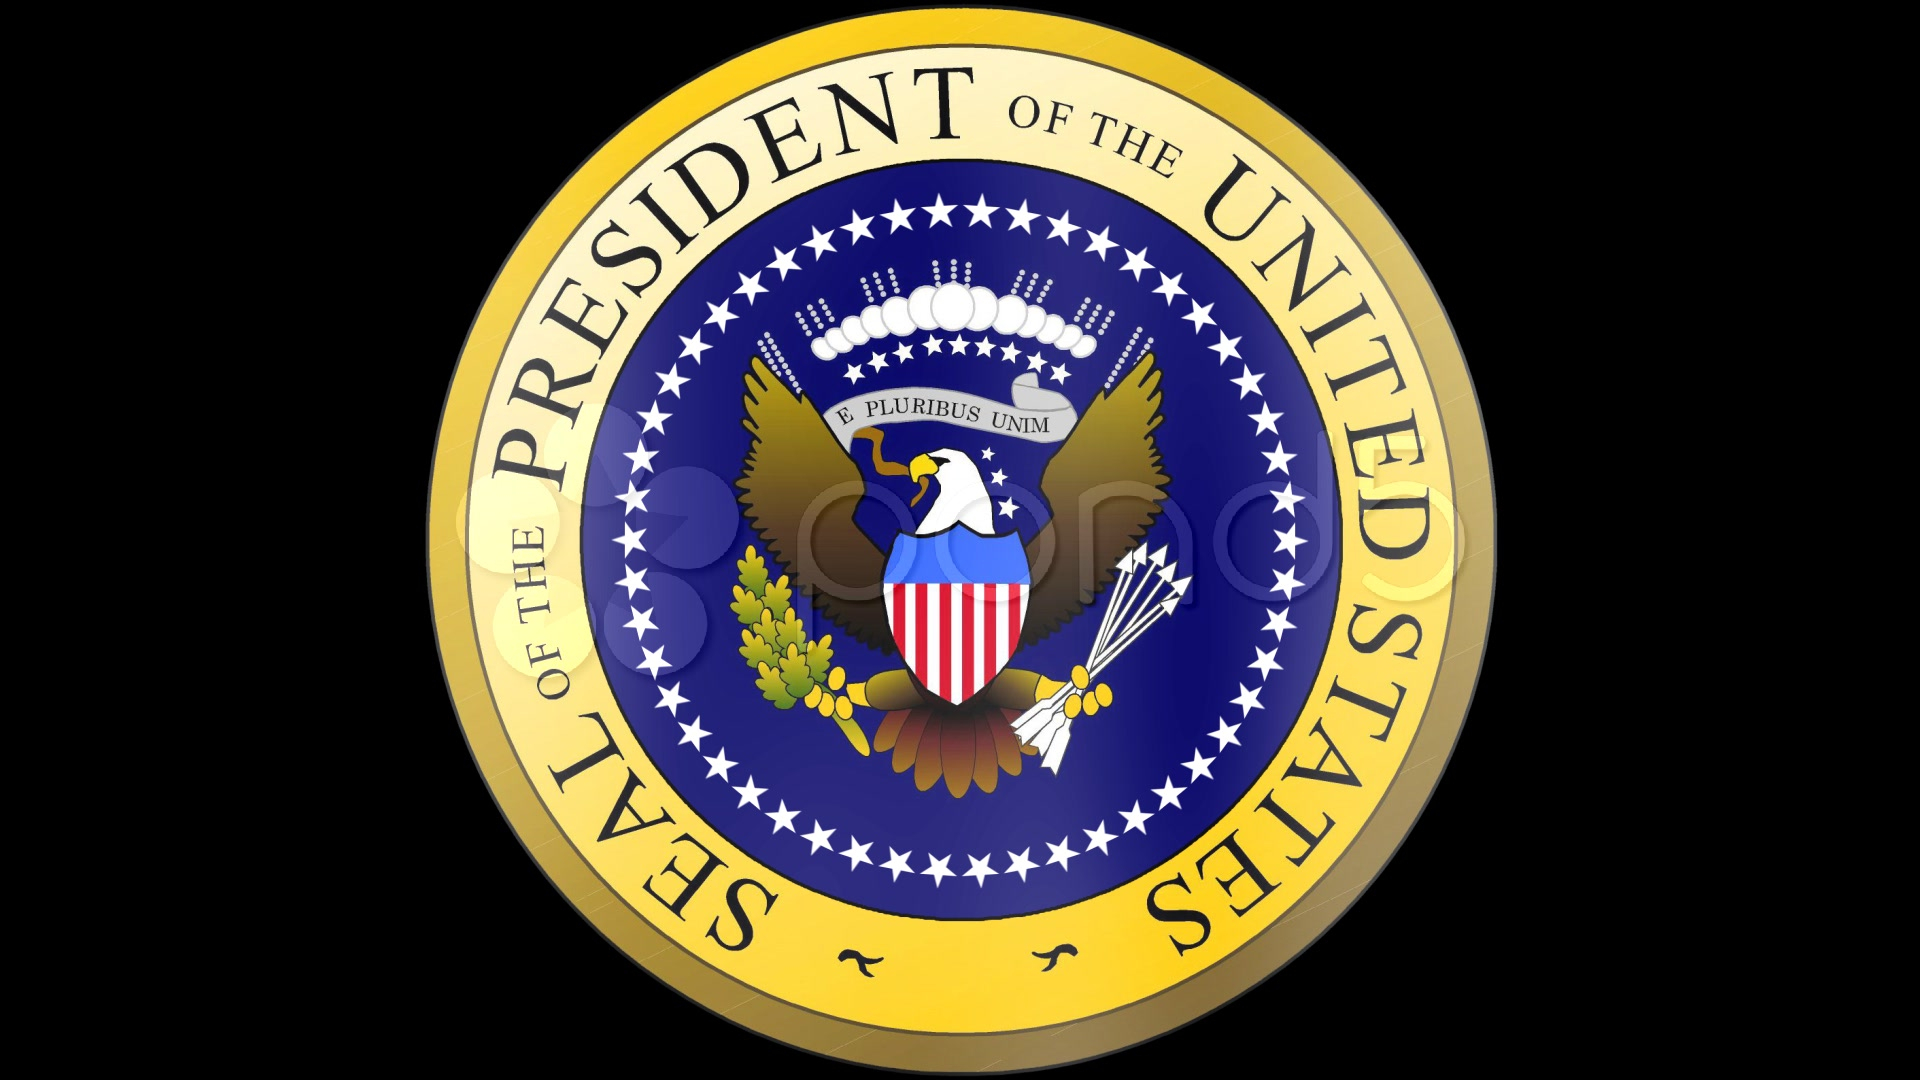 1920x1080 Presidential Seal Wallpapers Top Free Presidential Seal Backgrounds